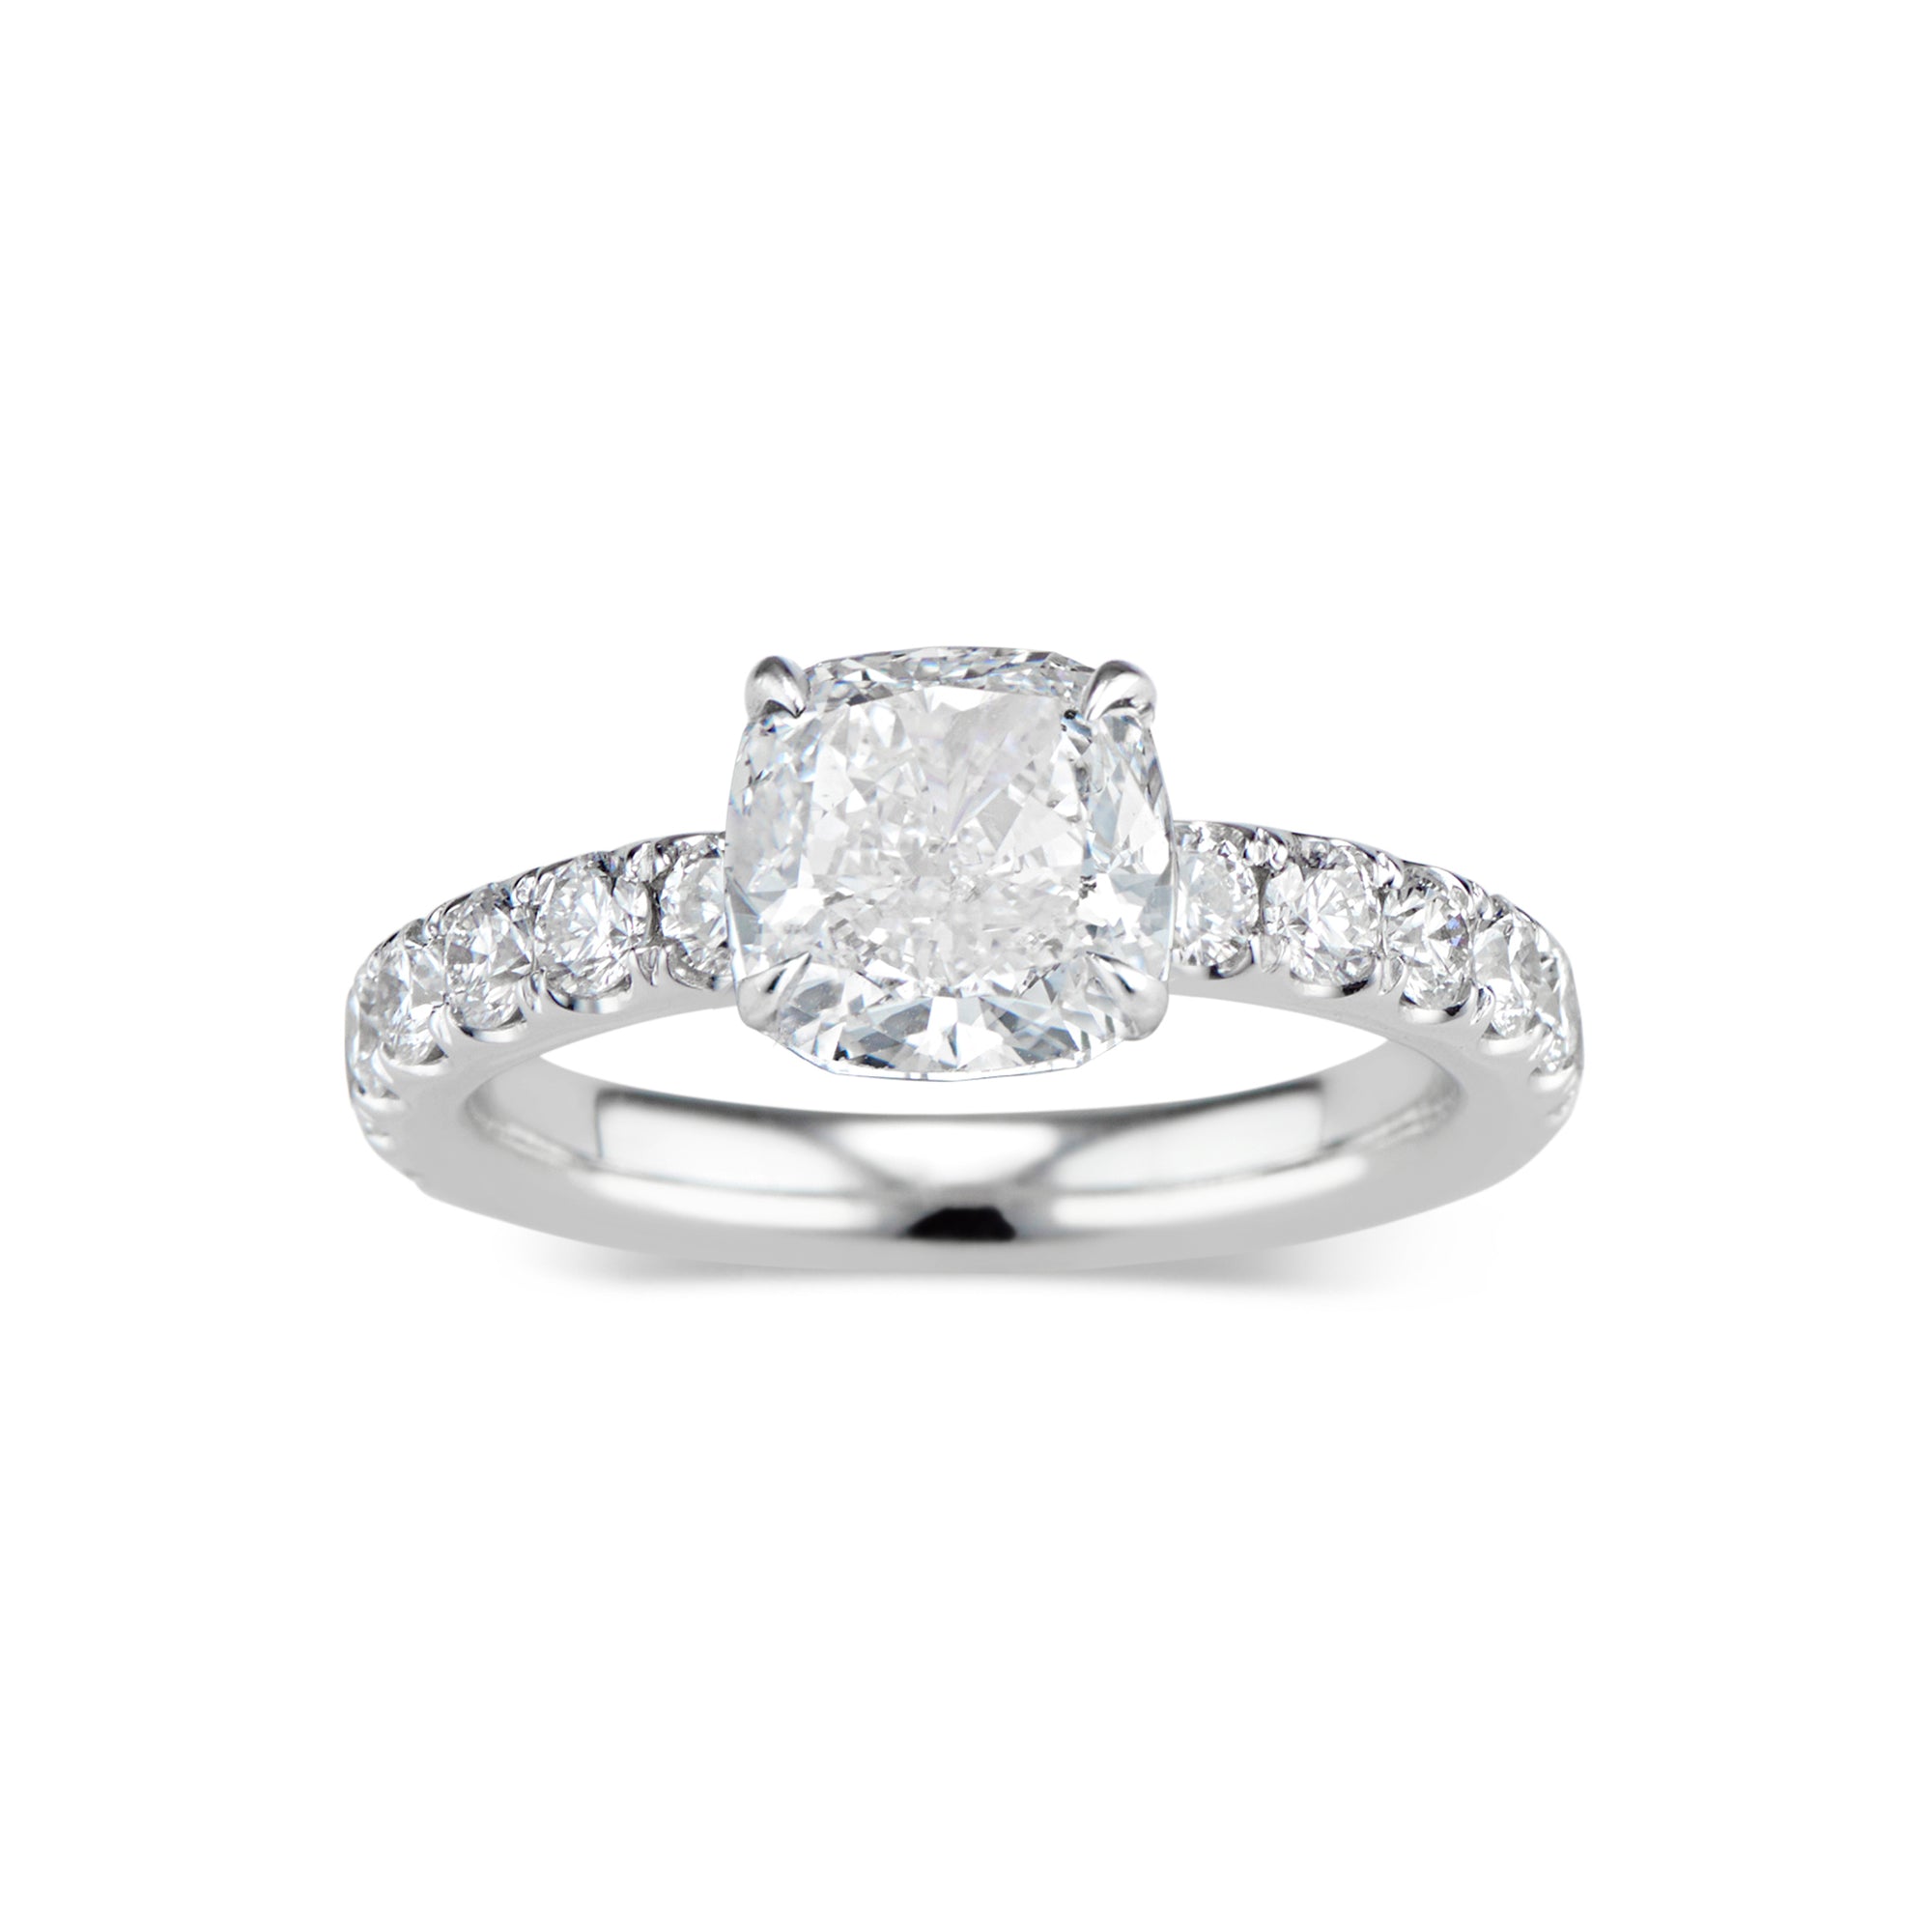 Cushion Diamond Engagement Ring with Diamond Shank  - 58 round diamonds totaling 1.02 carats  GIA graded F - G color, VS2 - SI1 clarity